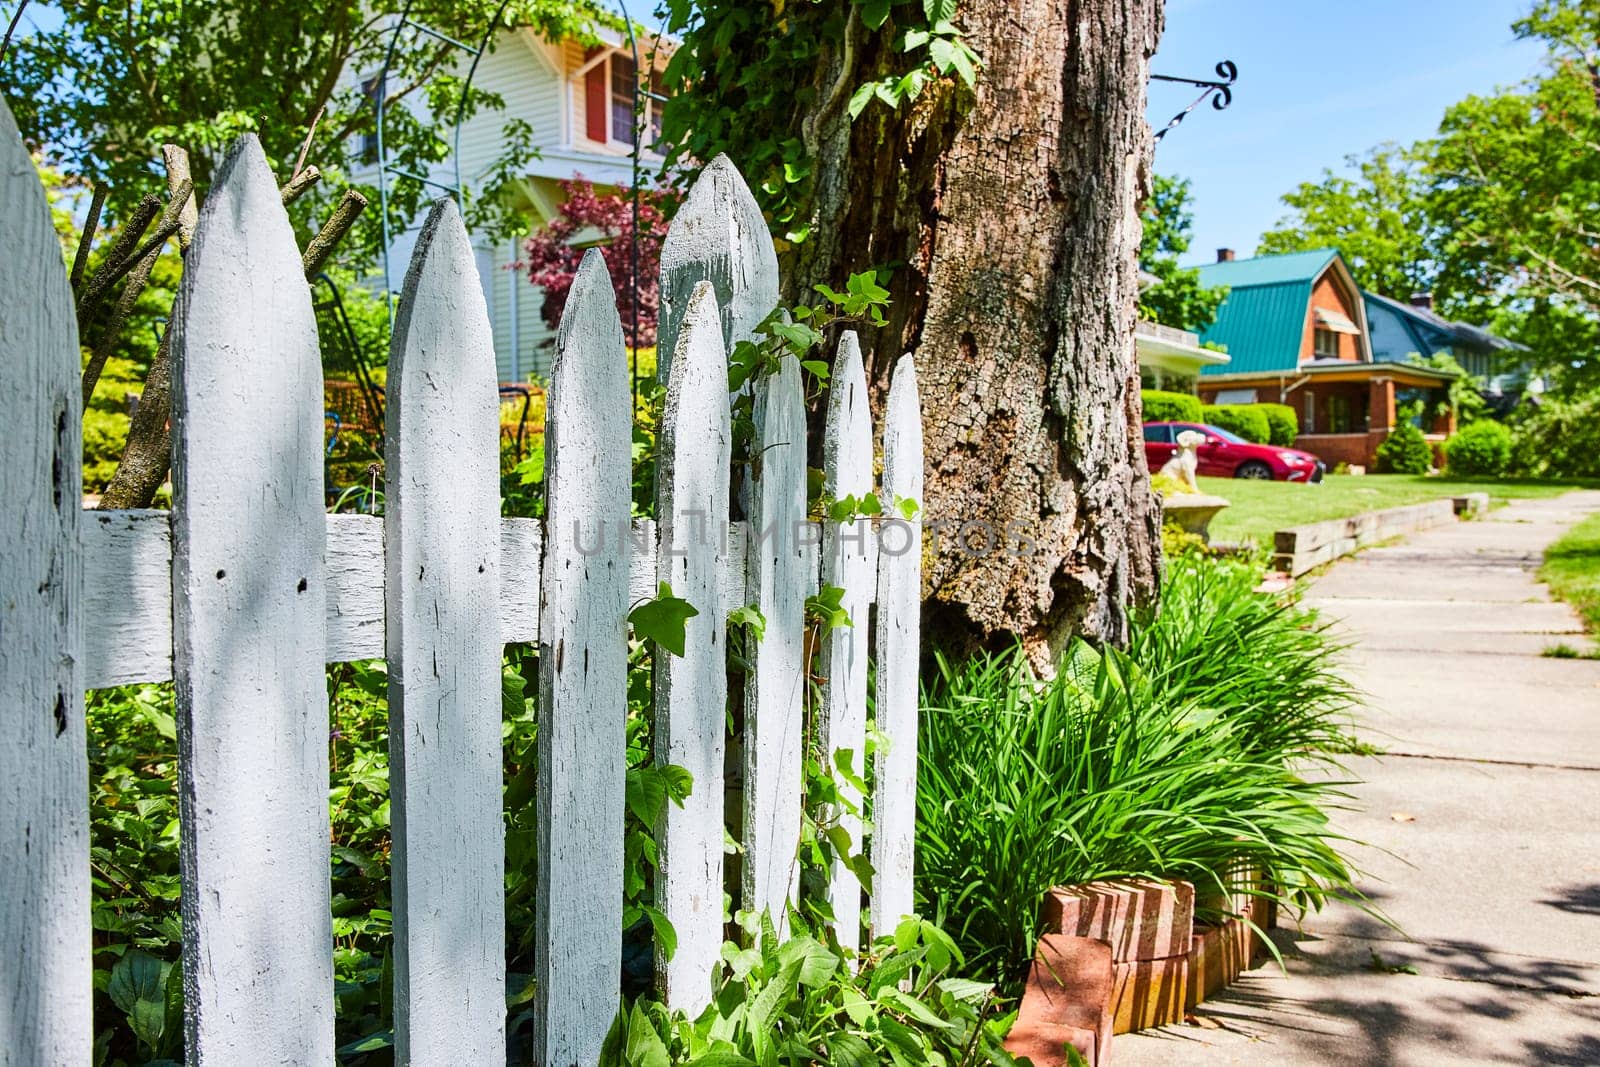 Idyllic suburban scene in Fort Wayne with a rustic white picket fence, vibrant garden, and classic homes.